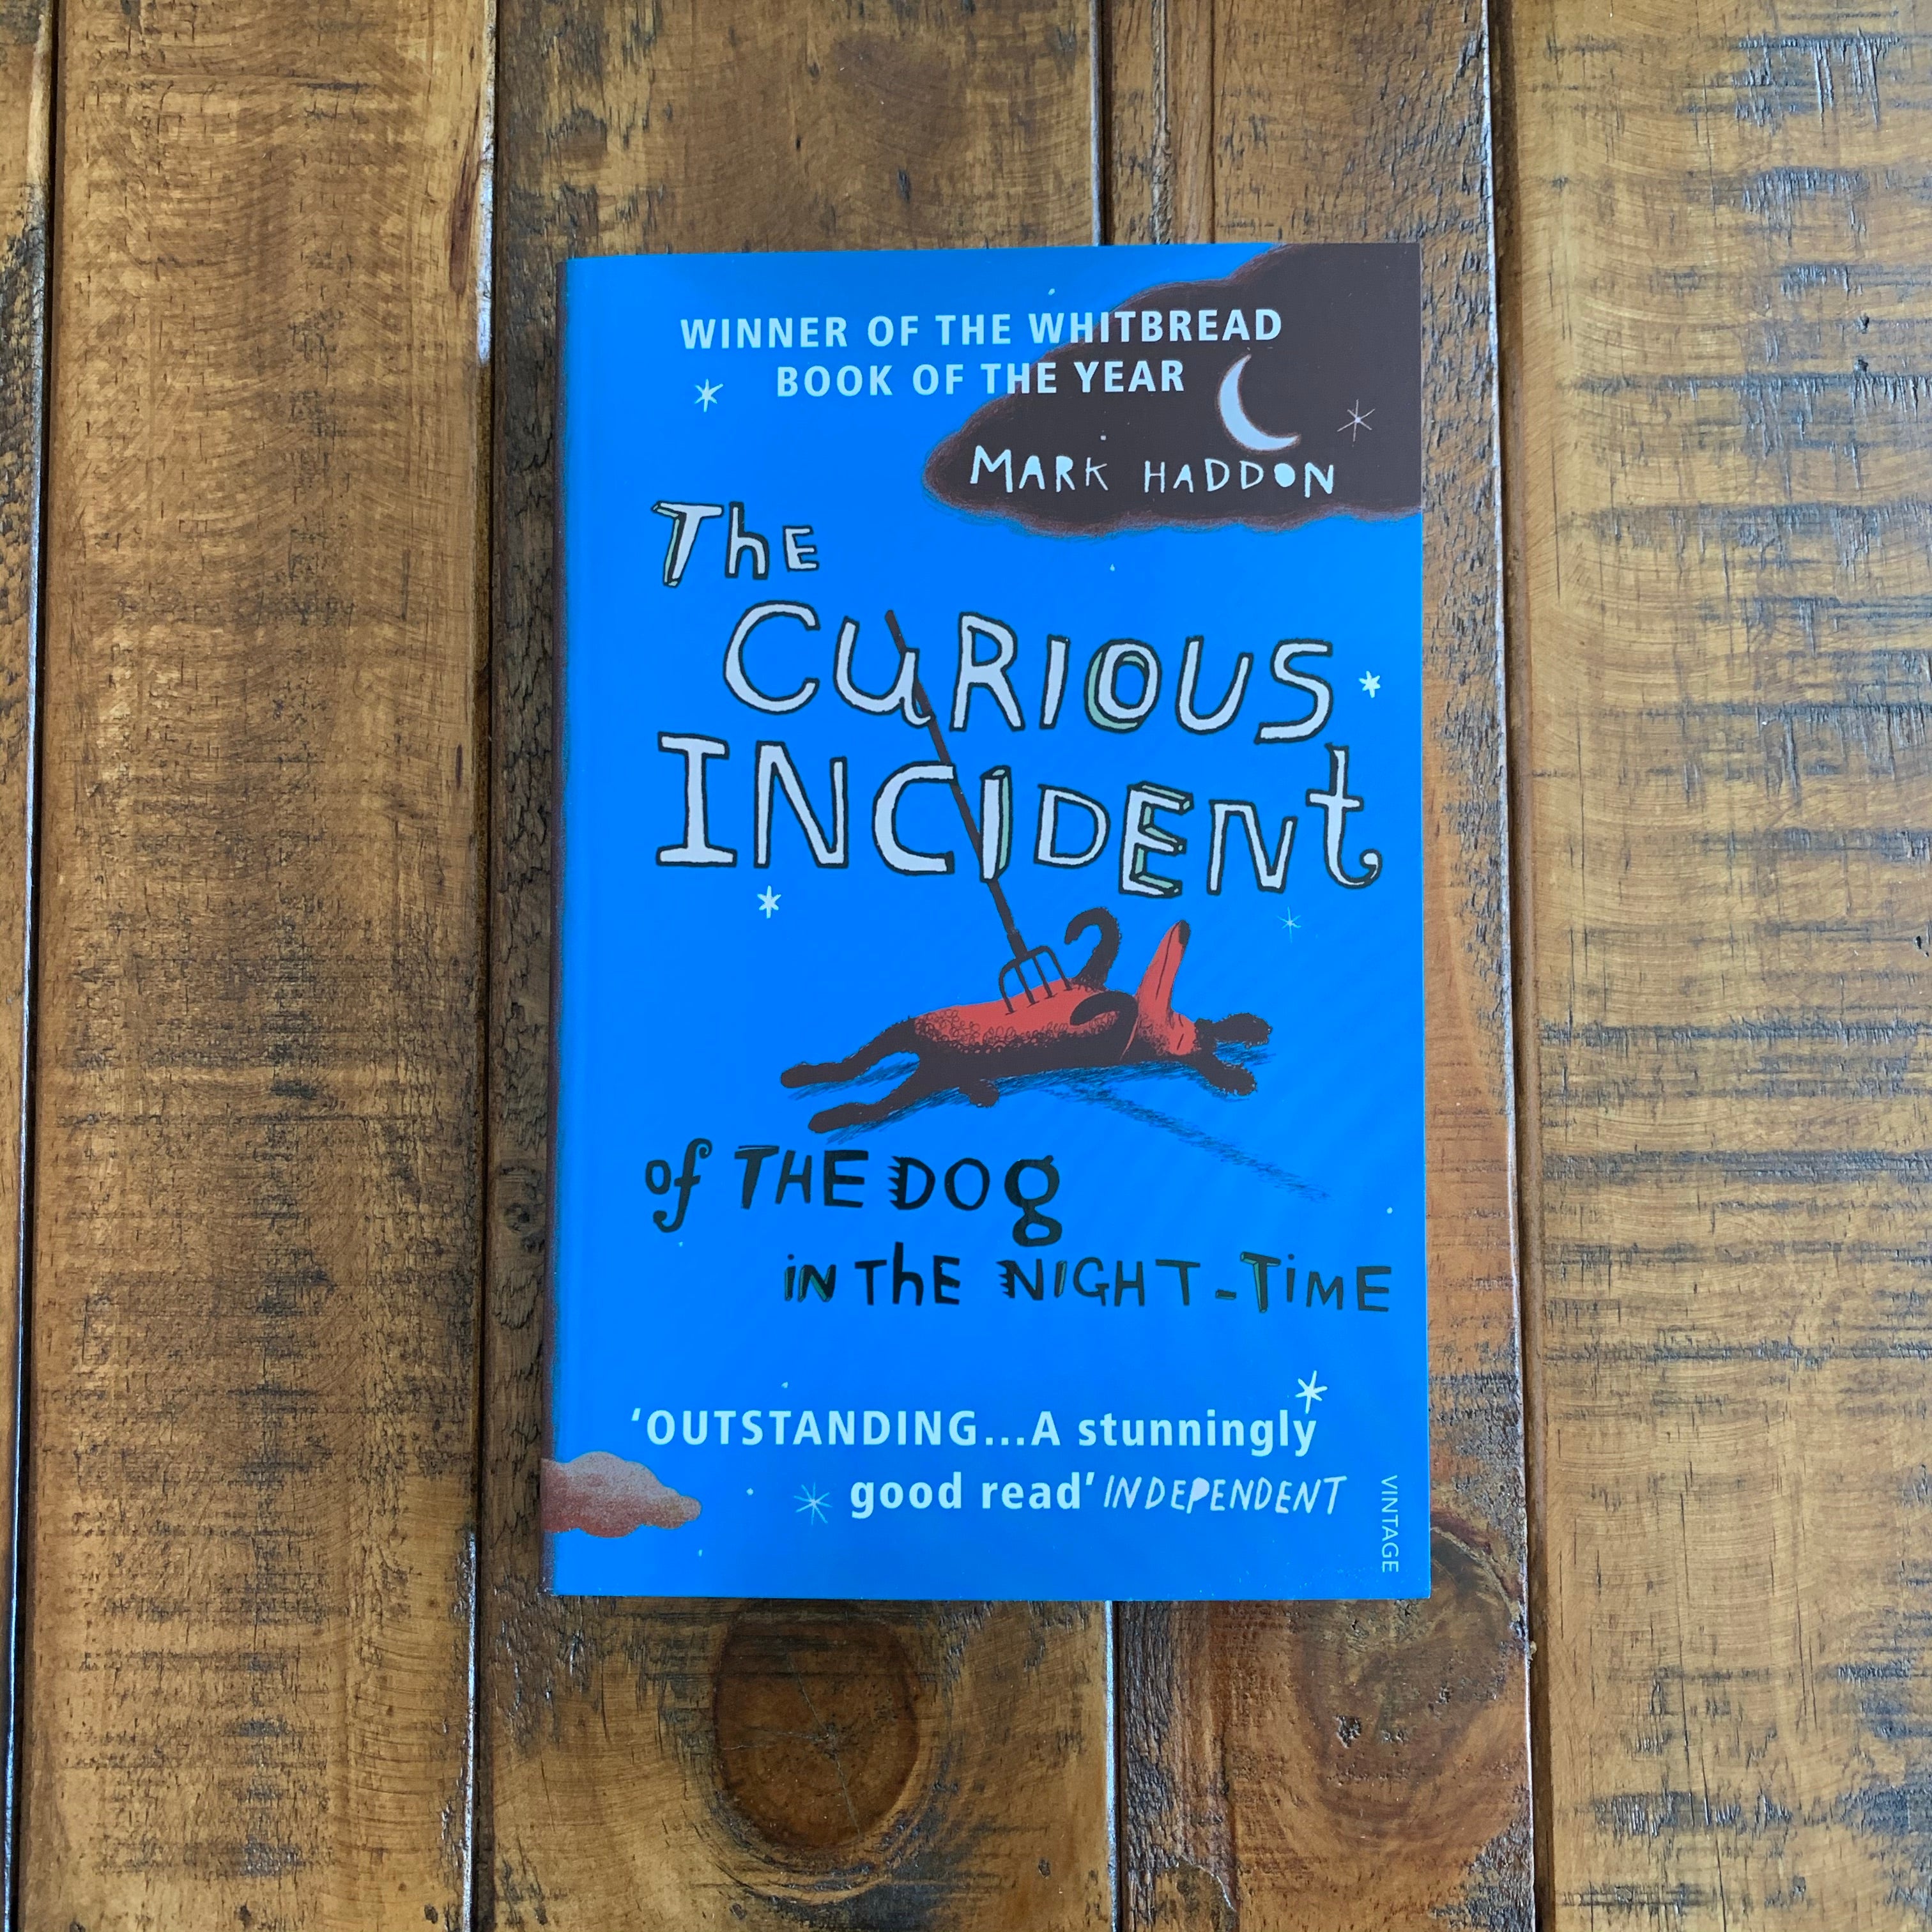 The Curious Incident of the Dog in the Night-Time - Mark Haddon.epub